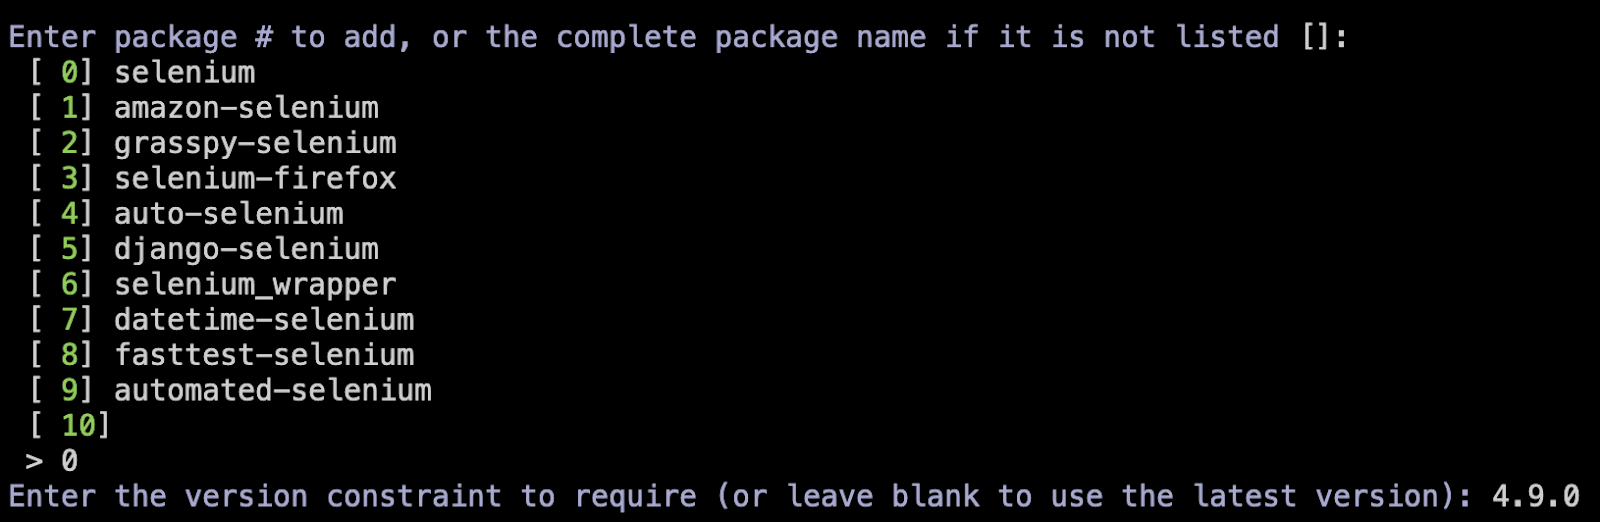 Select the relevant package name